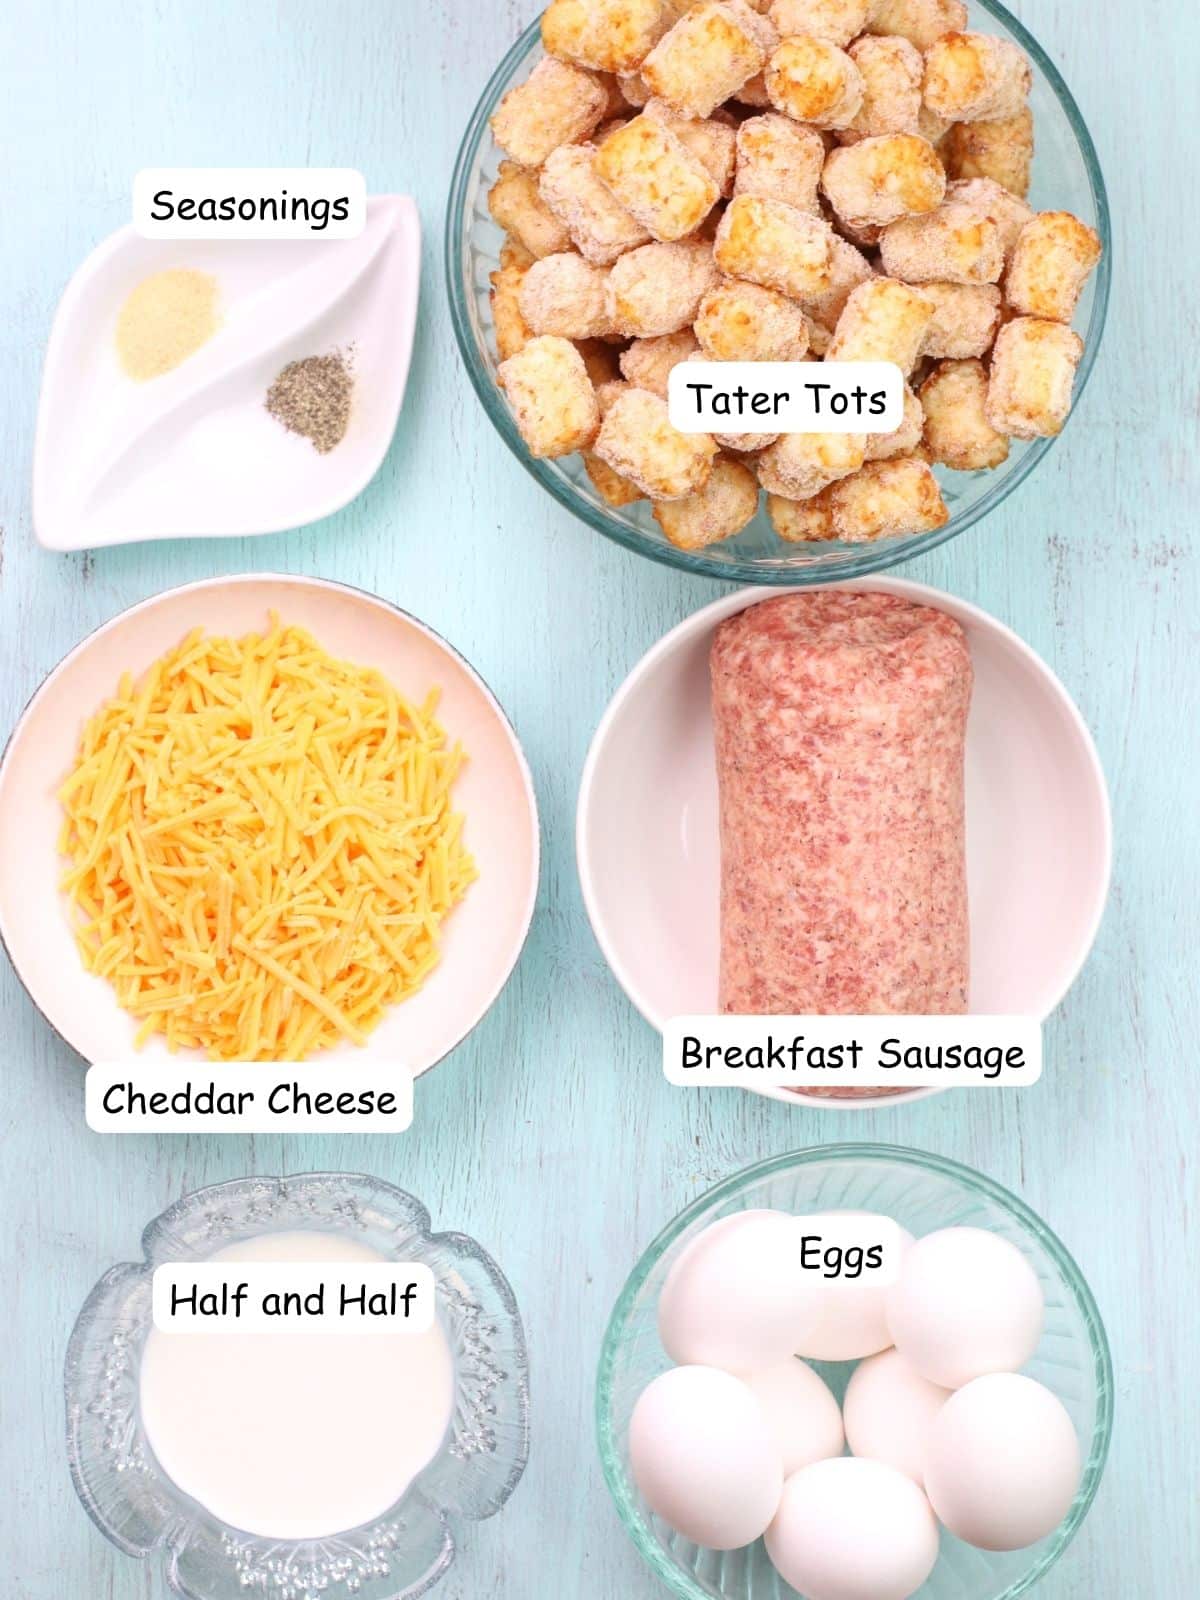 ingredients for breakfast casserole with eggs, sausage and tater tots.